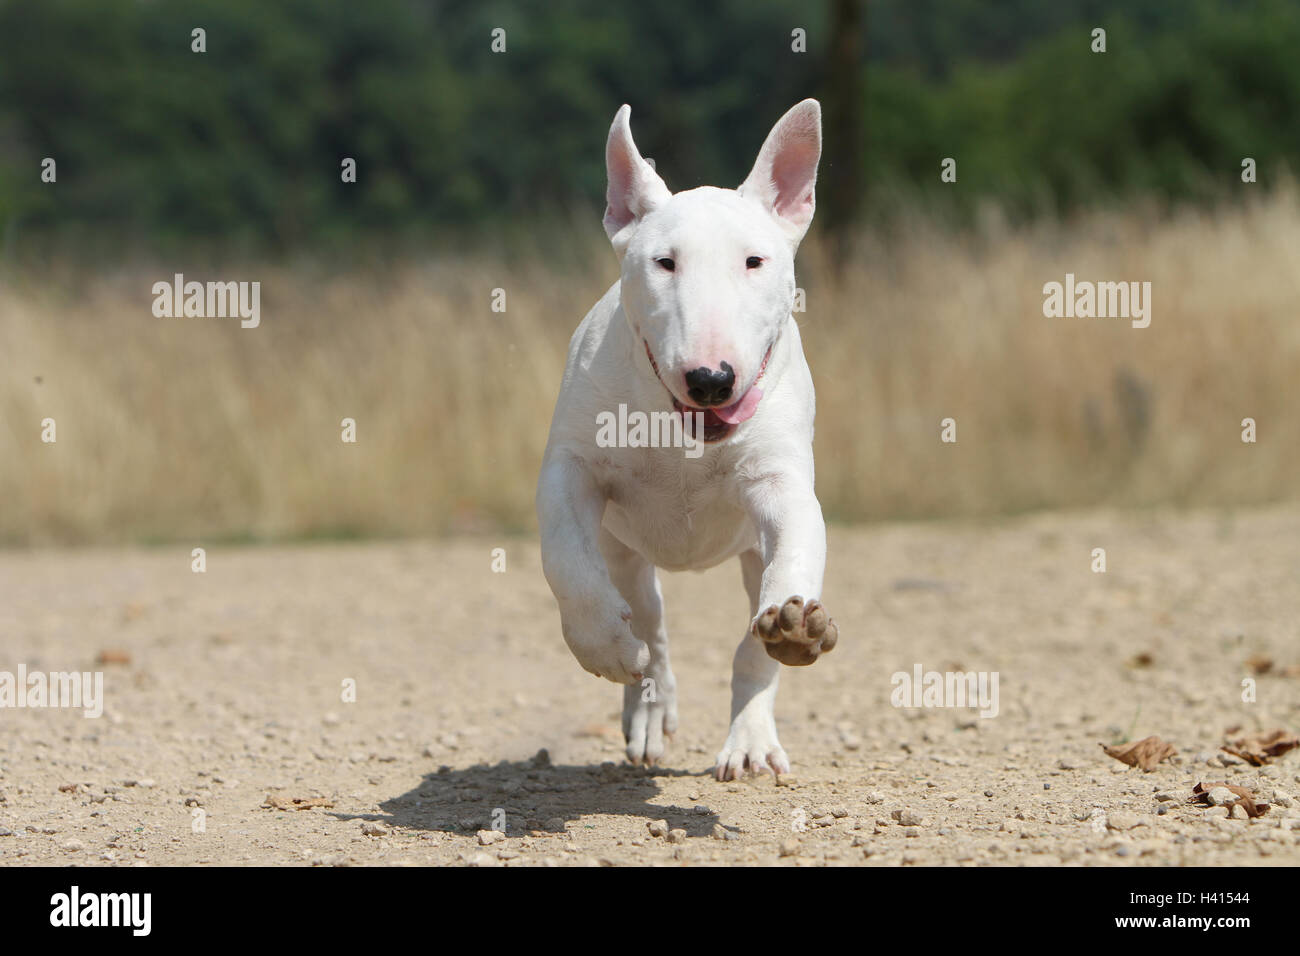 Dog Bull Terrier Anglais / bully / Gladator white lors de l'exécution Banque D'Images